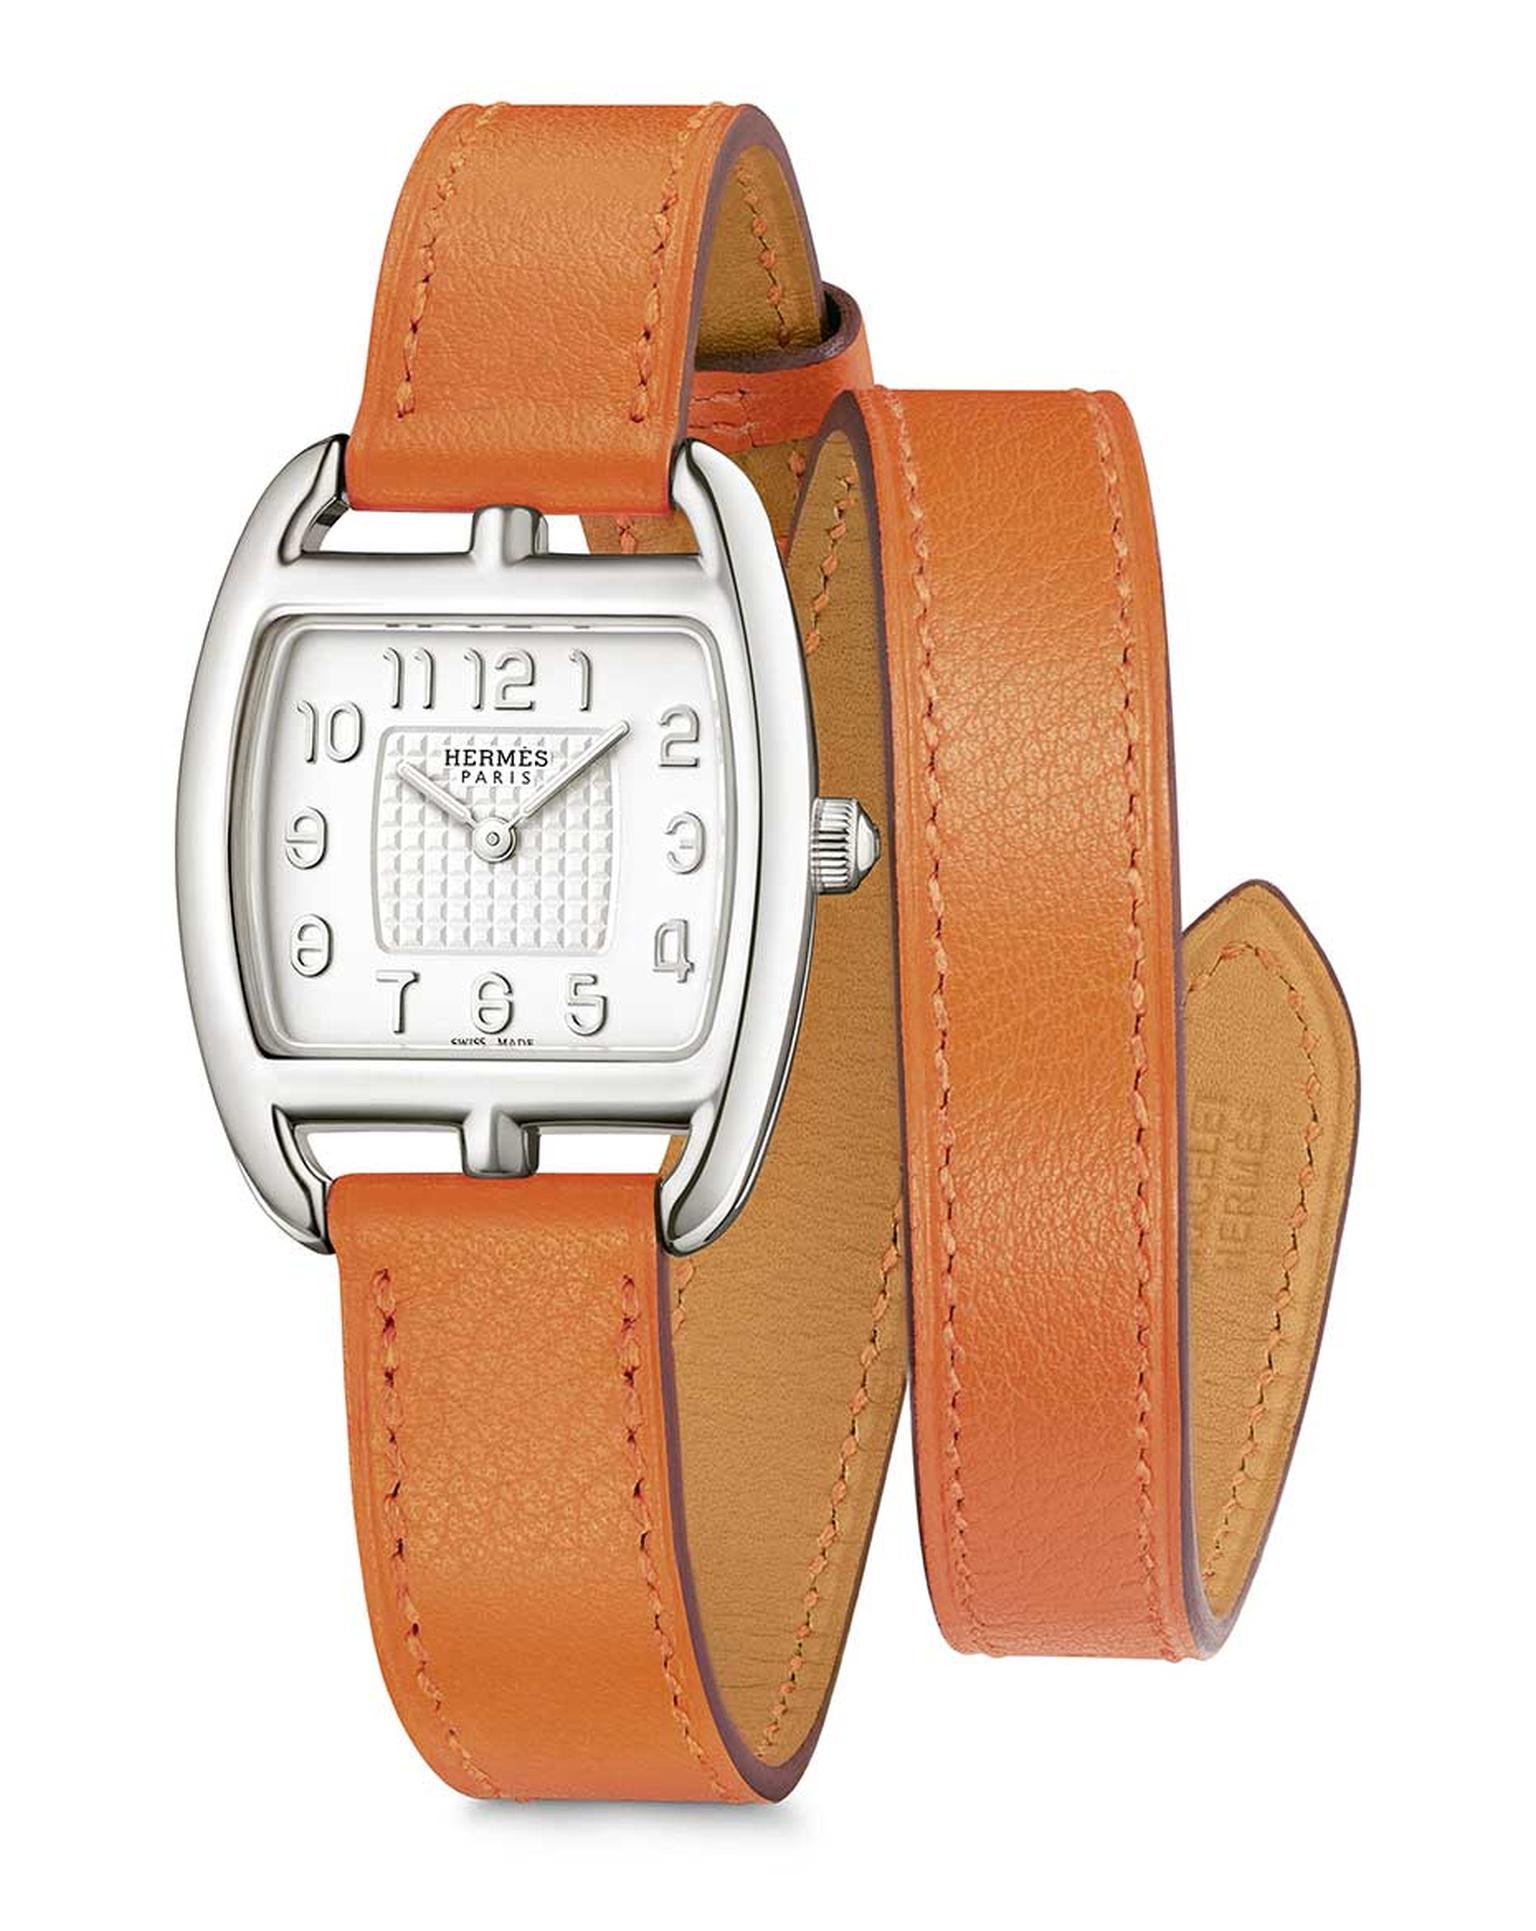 Also new for 2014 is the Hermès Cape Cod Tonneau in silver, with a double orange leather strap